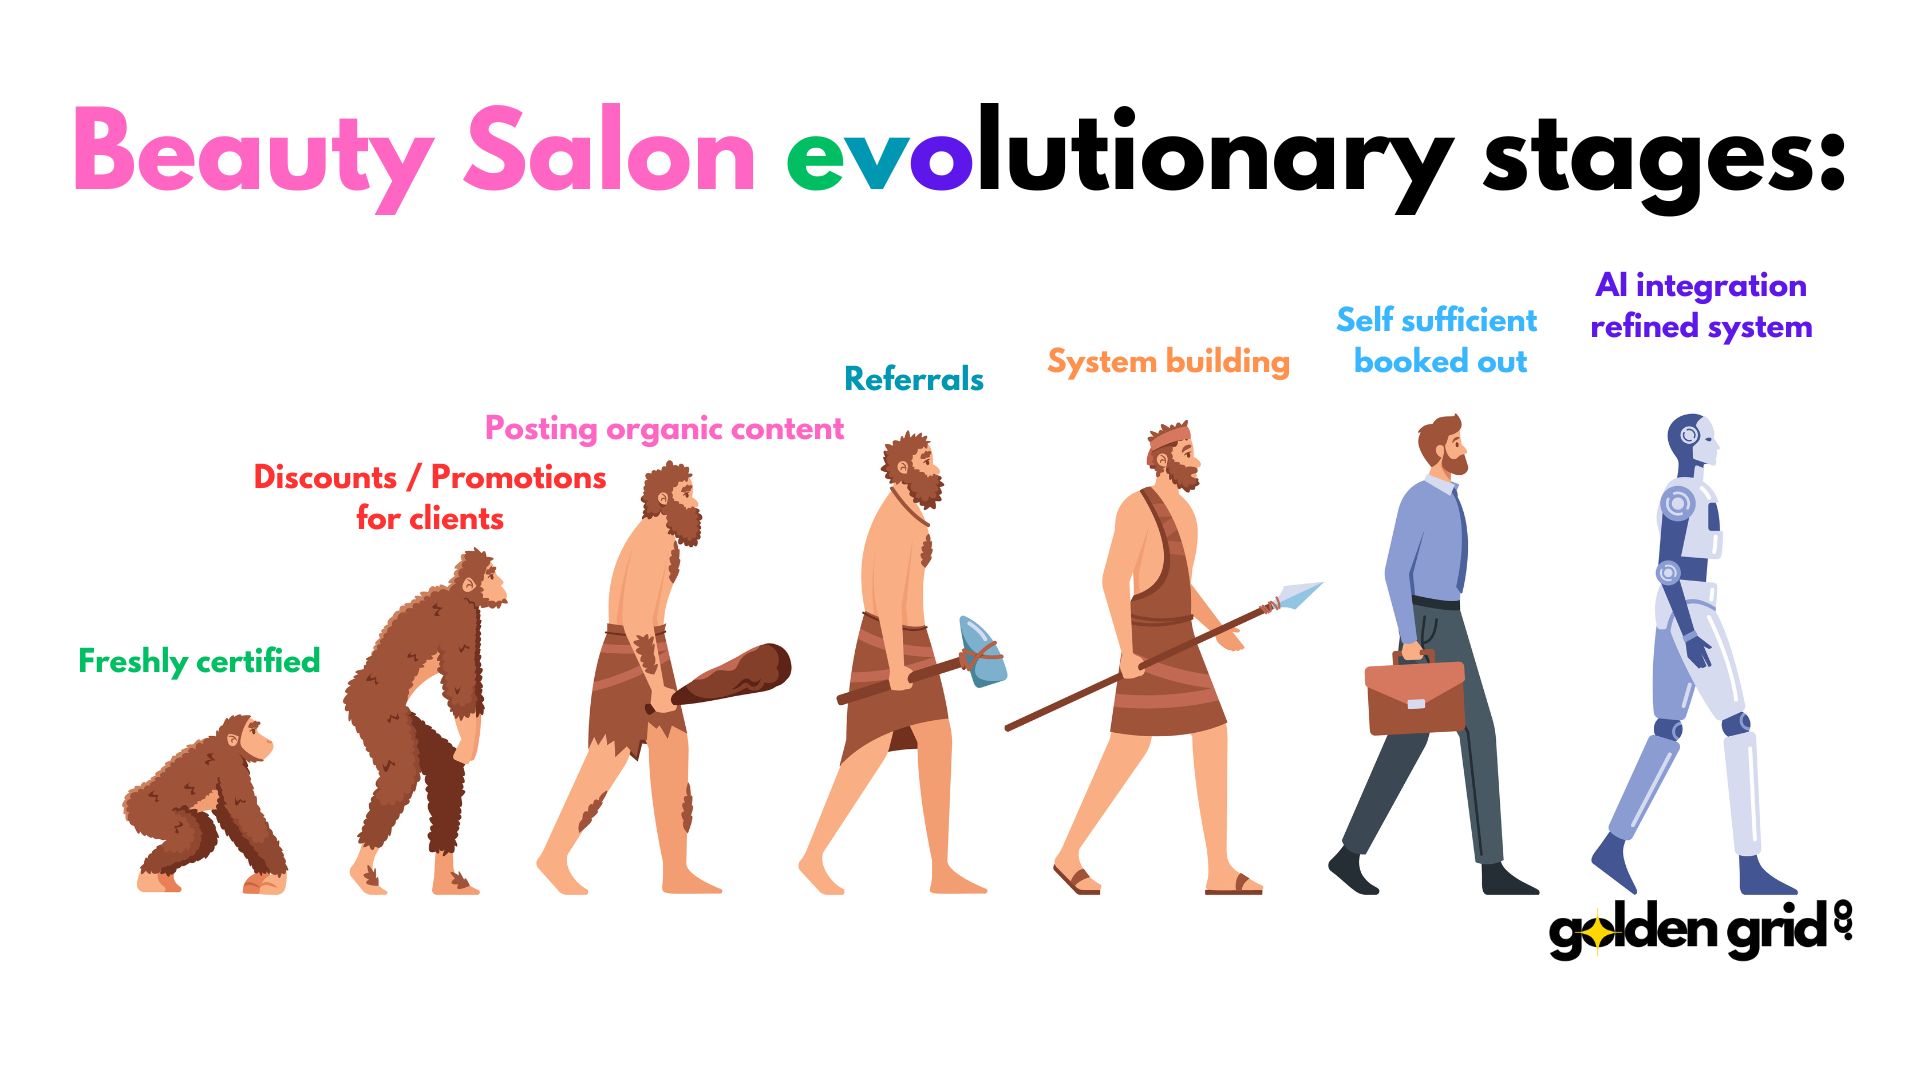 Beauty salon evolutionary stages